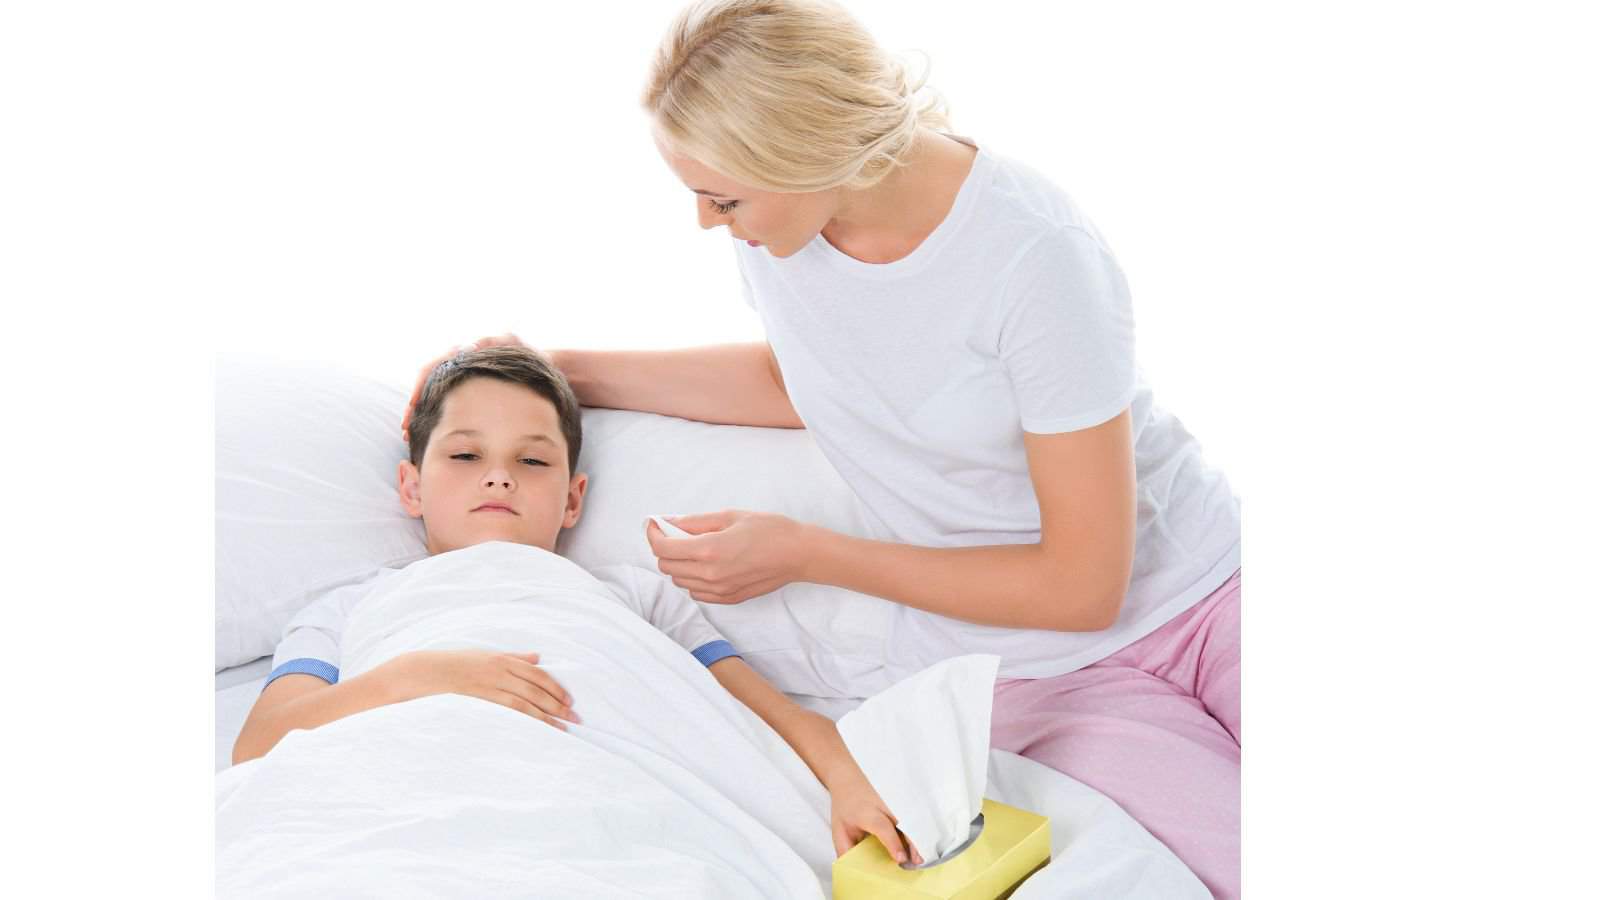 Mother with napkins sitting near sick son, isolated on white